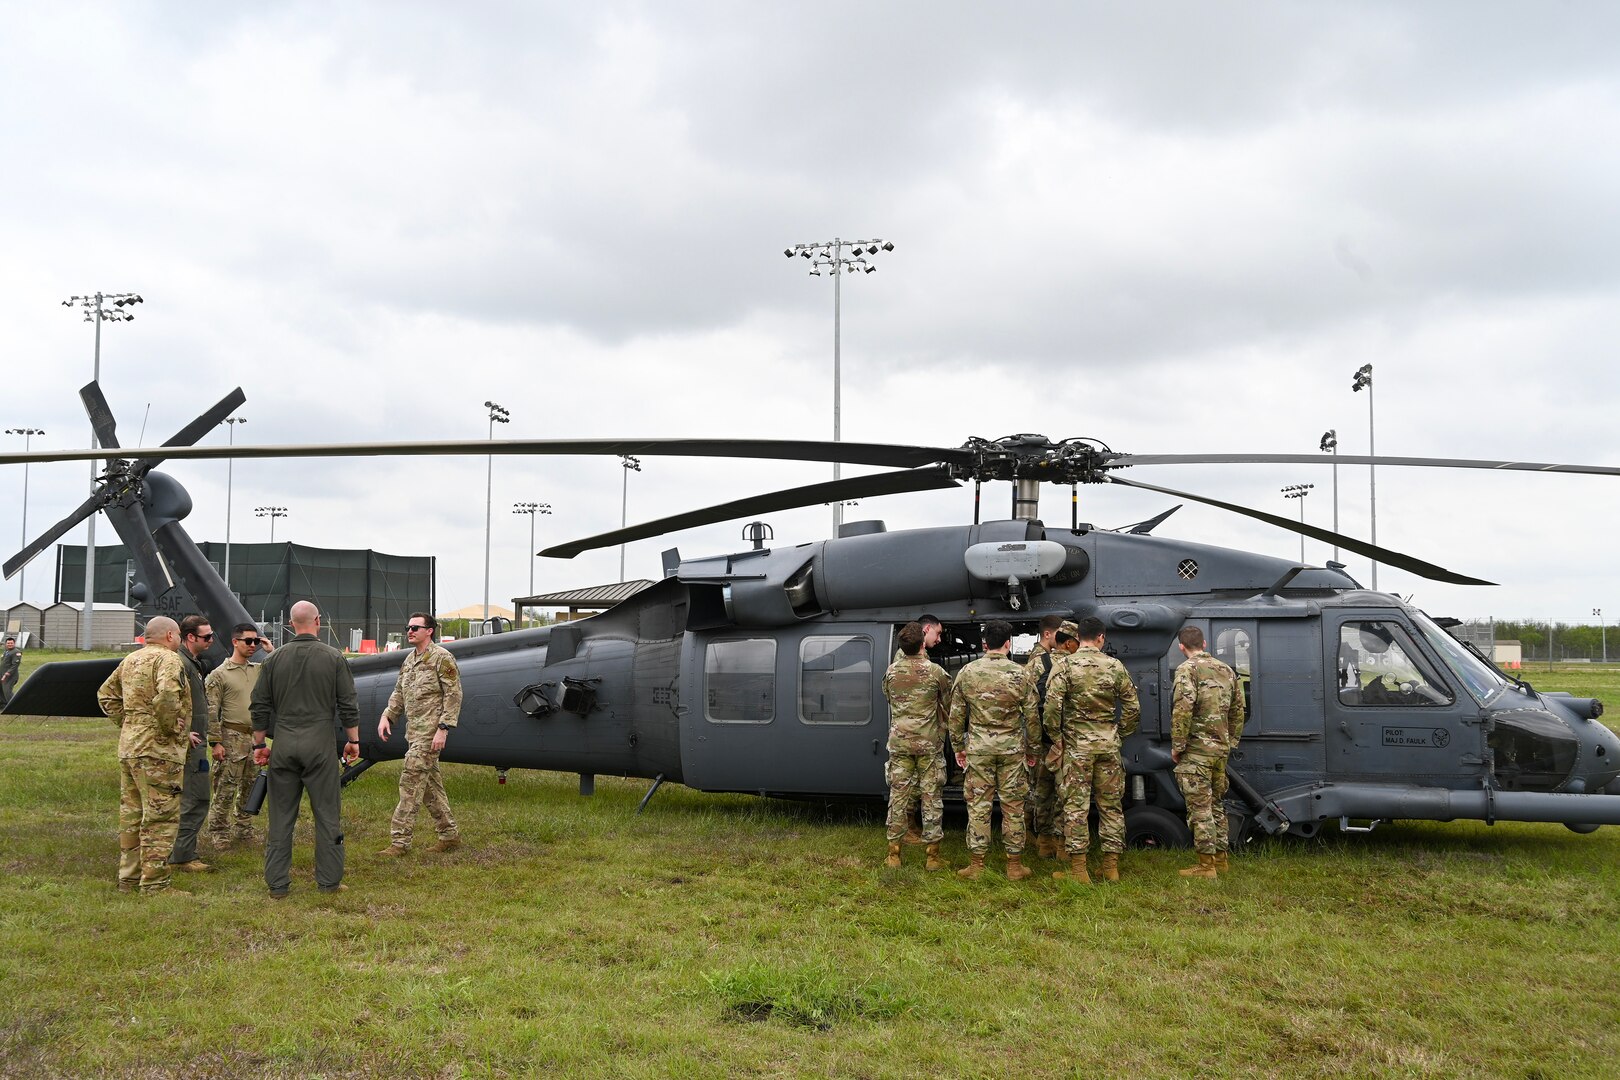 Helicopters at JBSA-Lackland